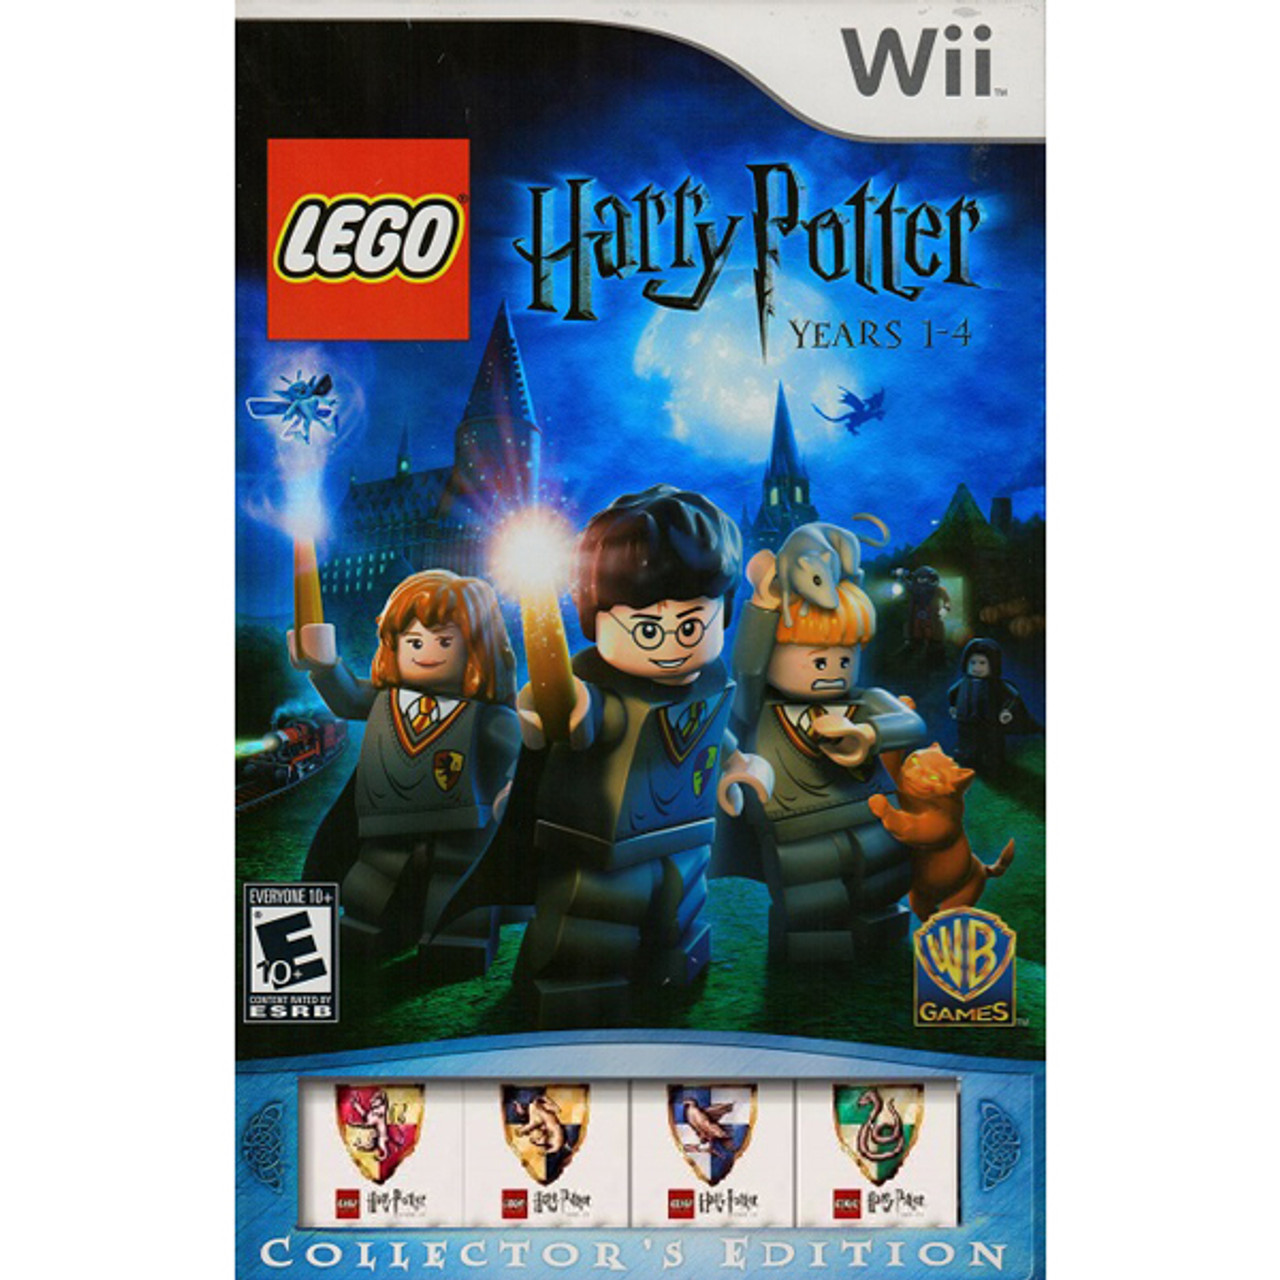 LEGO Harry Potter: Years 1-4 for Nintendo Wii